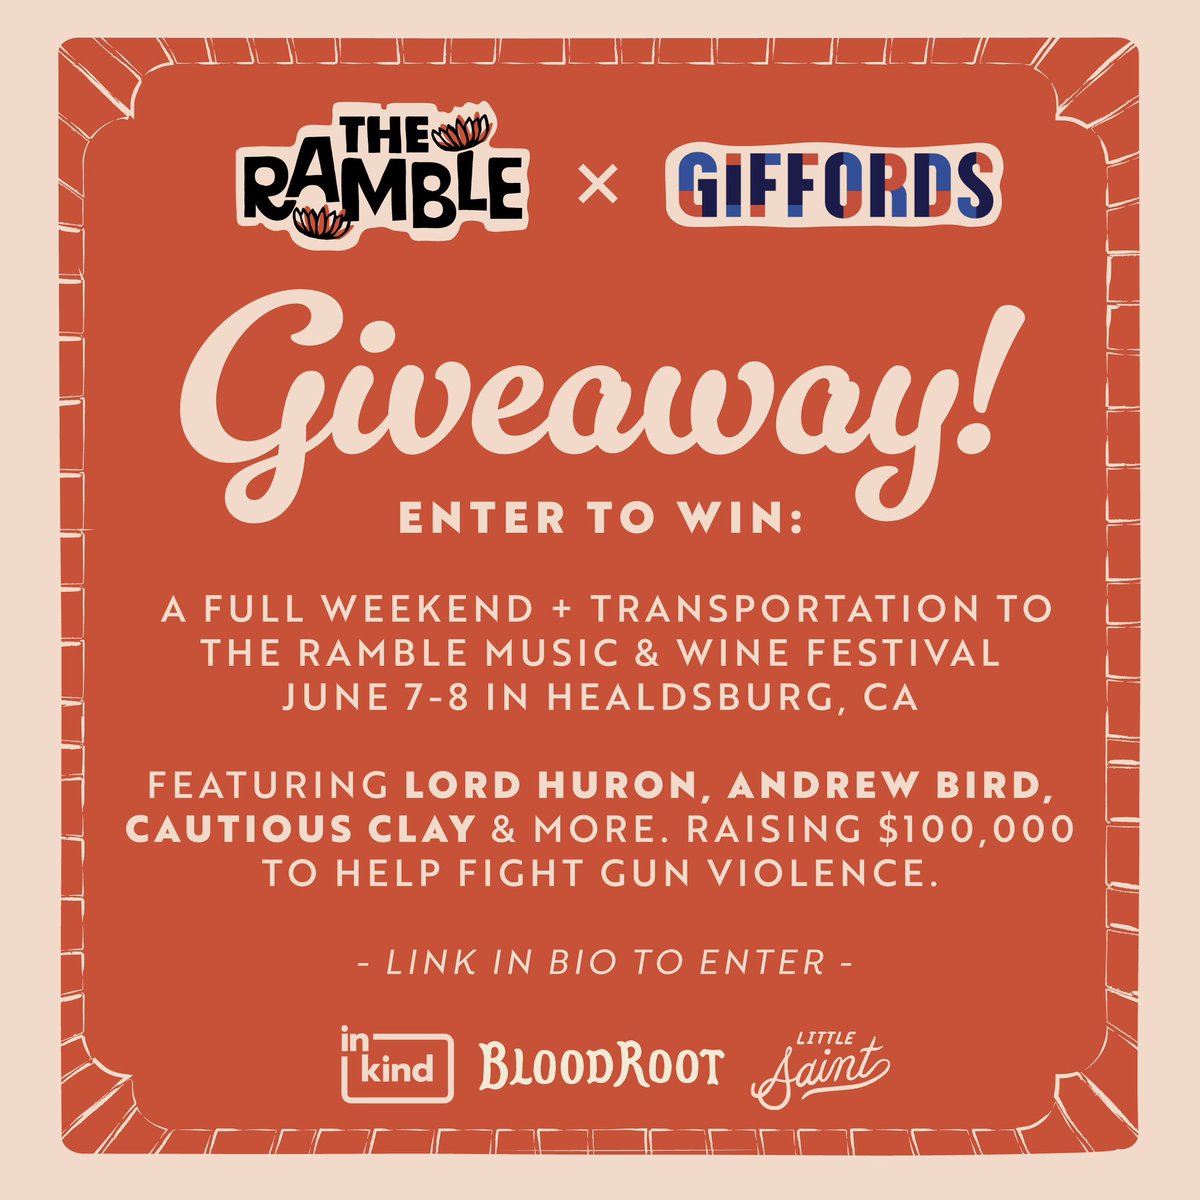 🎉 GIVEAWAY 🎉 Win a free trip and VIP tickets to The Ramble music & wine festival supporting our work to end gun violence. Don’t miss your chance to see @LordHuron & many more bands in Sonoma wine country June 7-8. Enter by 5/17: secure.everyaction.com/4NaC8DuFzUSY49…